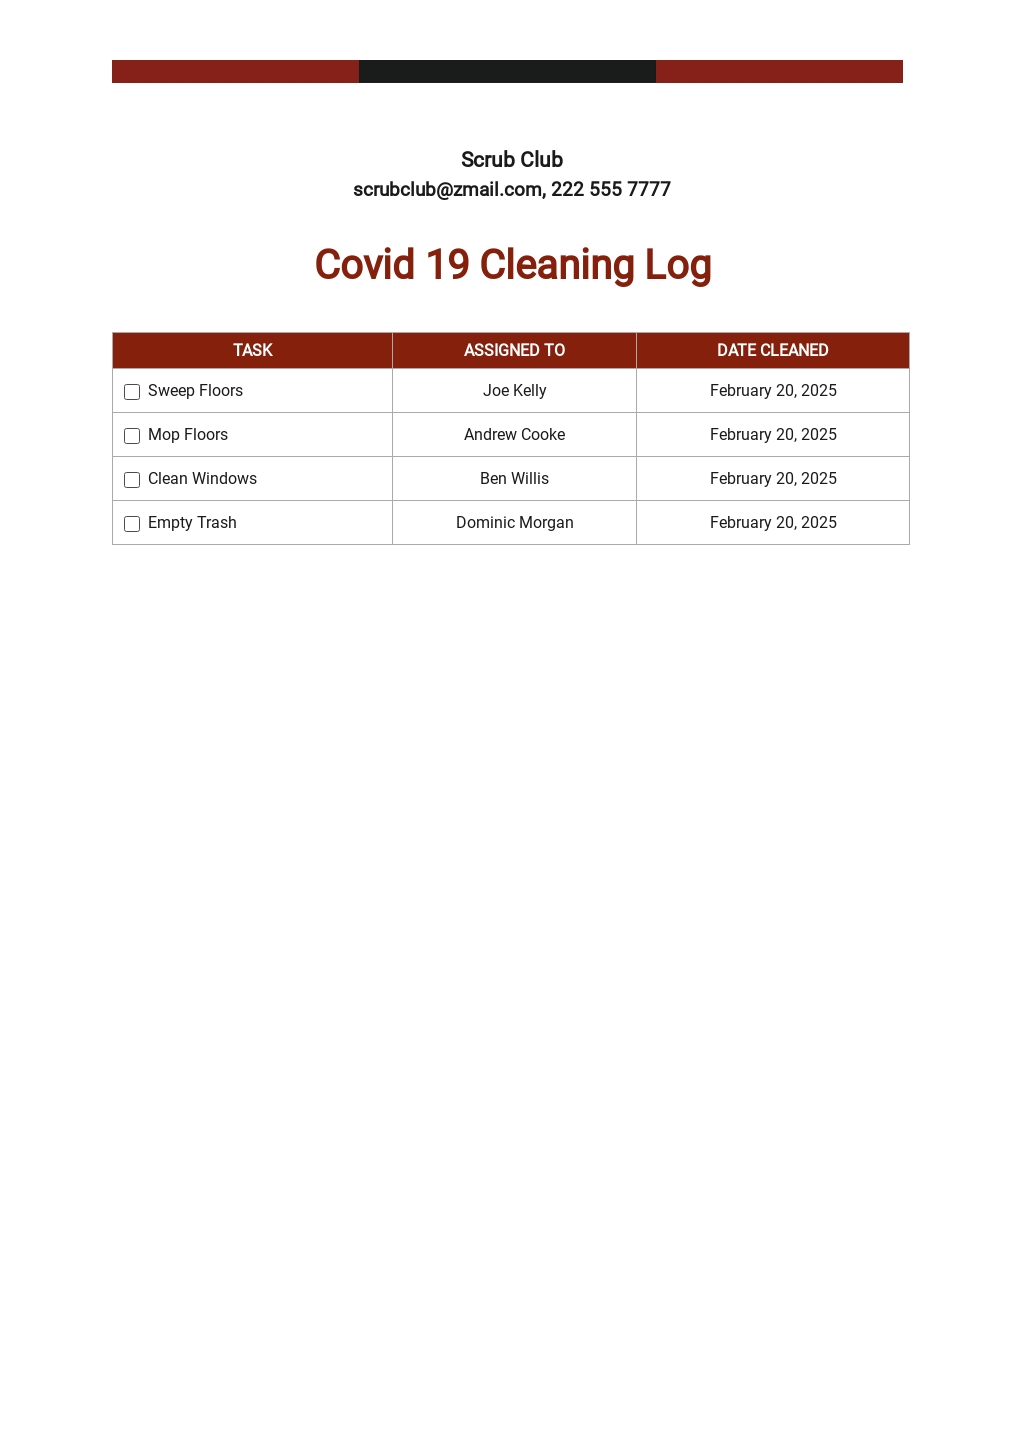 Covid 19 Cleaning Log Template.jpe